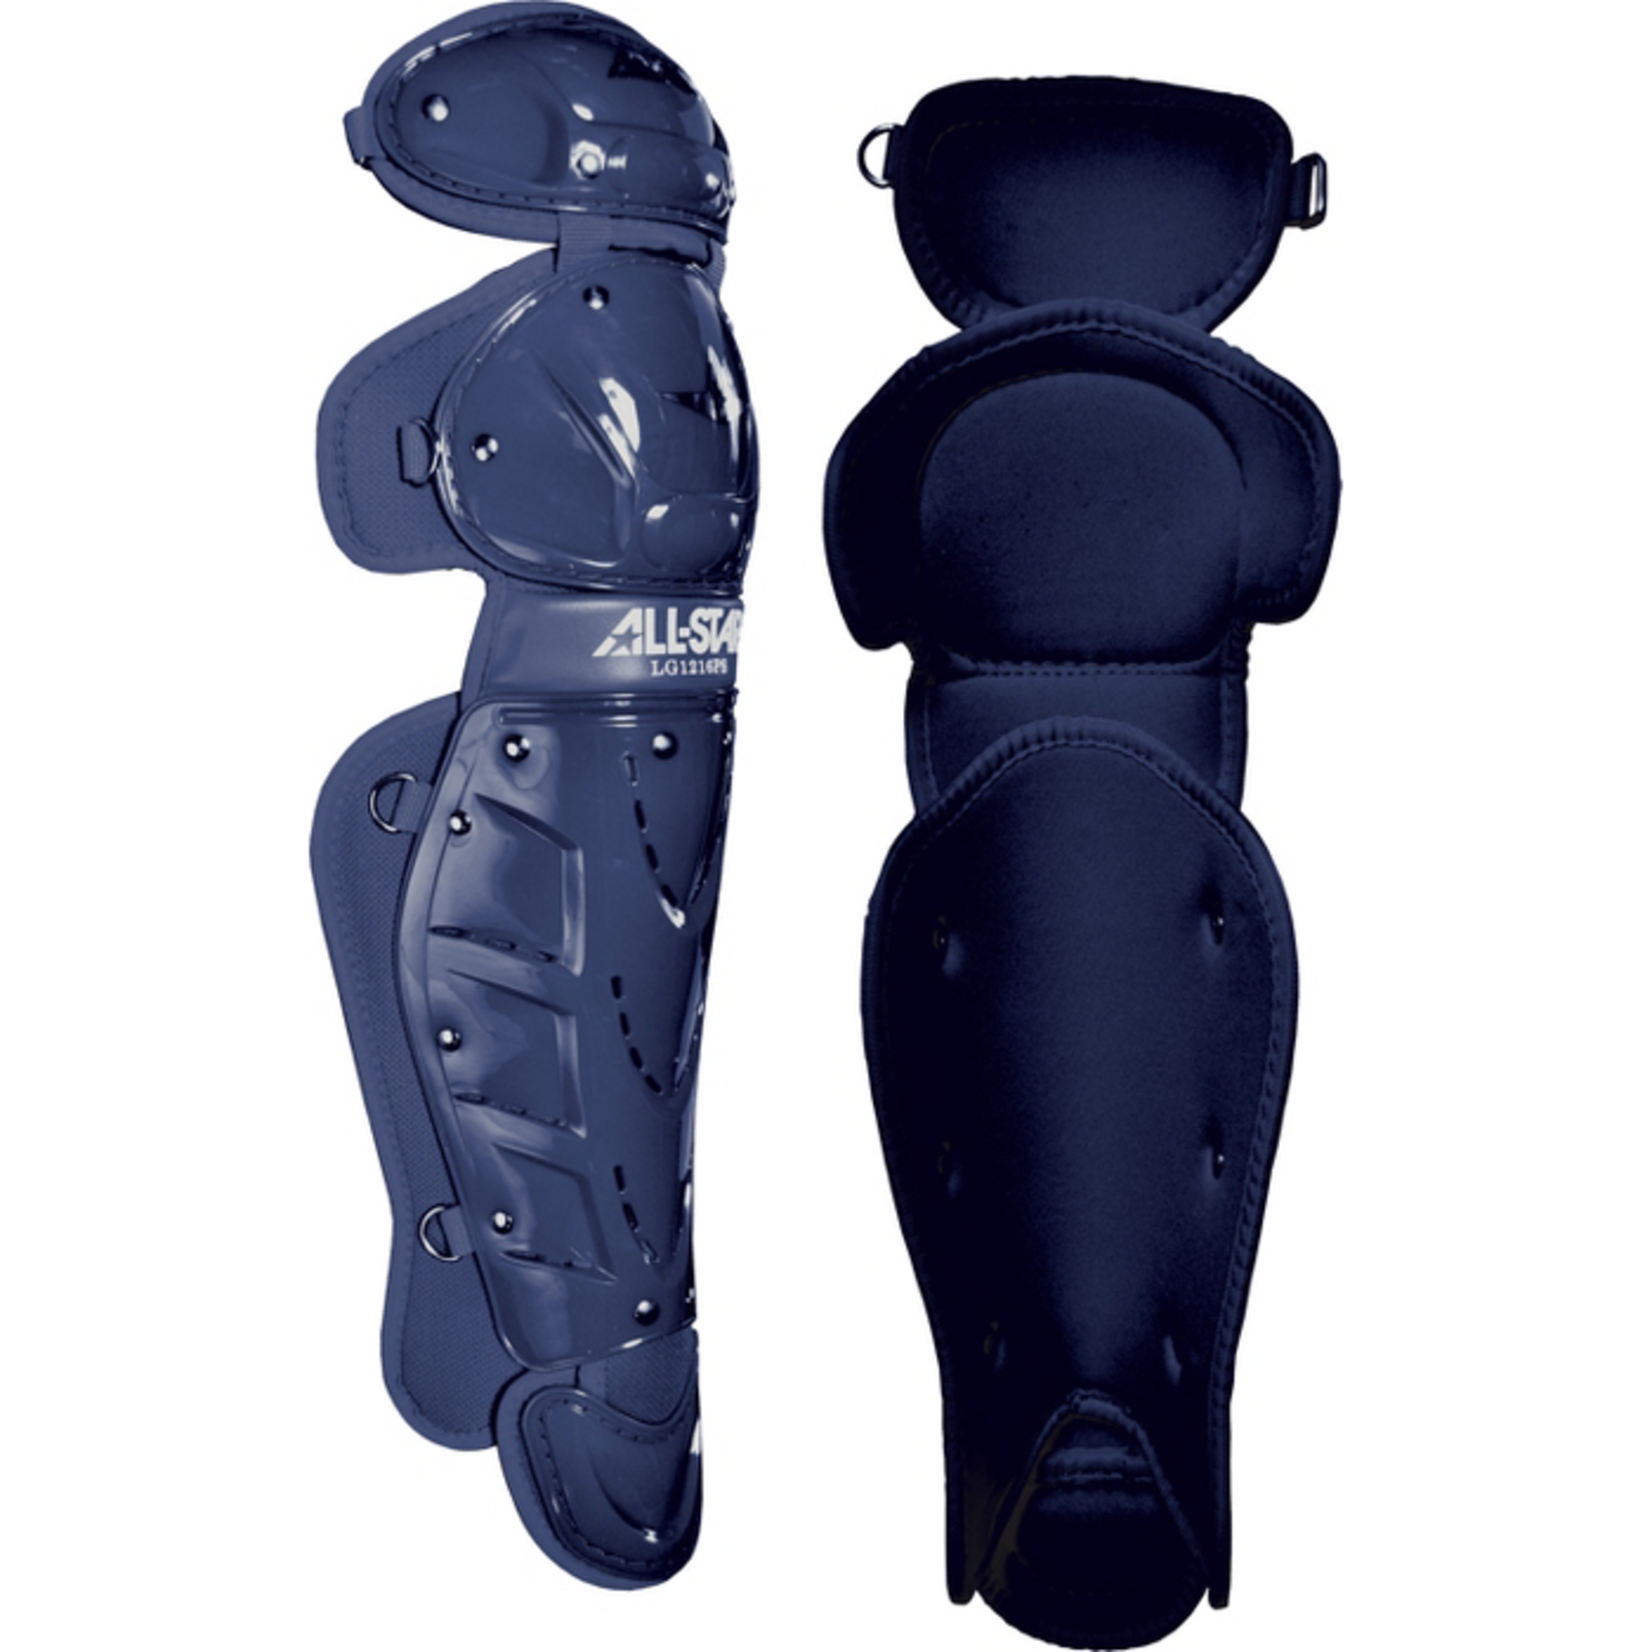 All Star All Star Youth Player's Series Catcher's Leg Guards - Ages 7-9 Navy